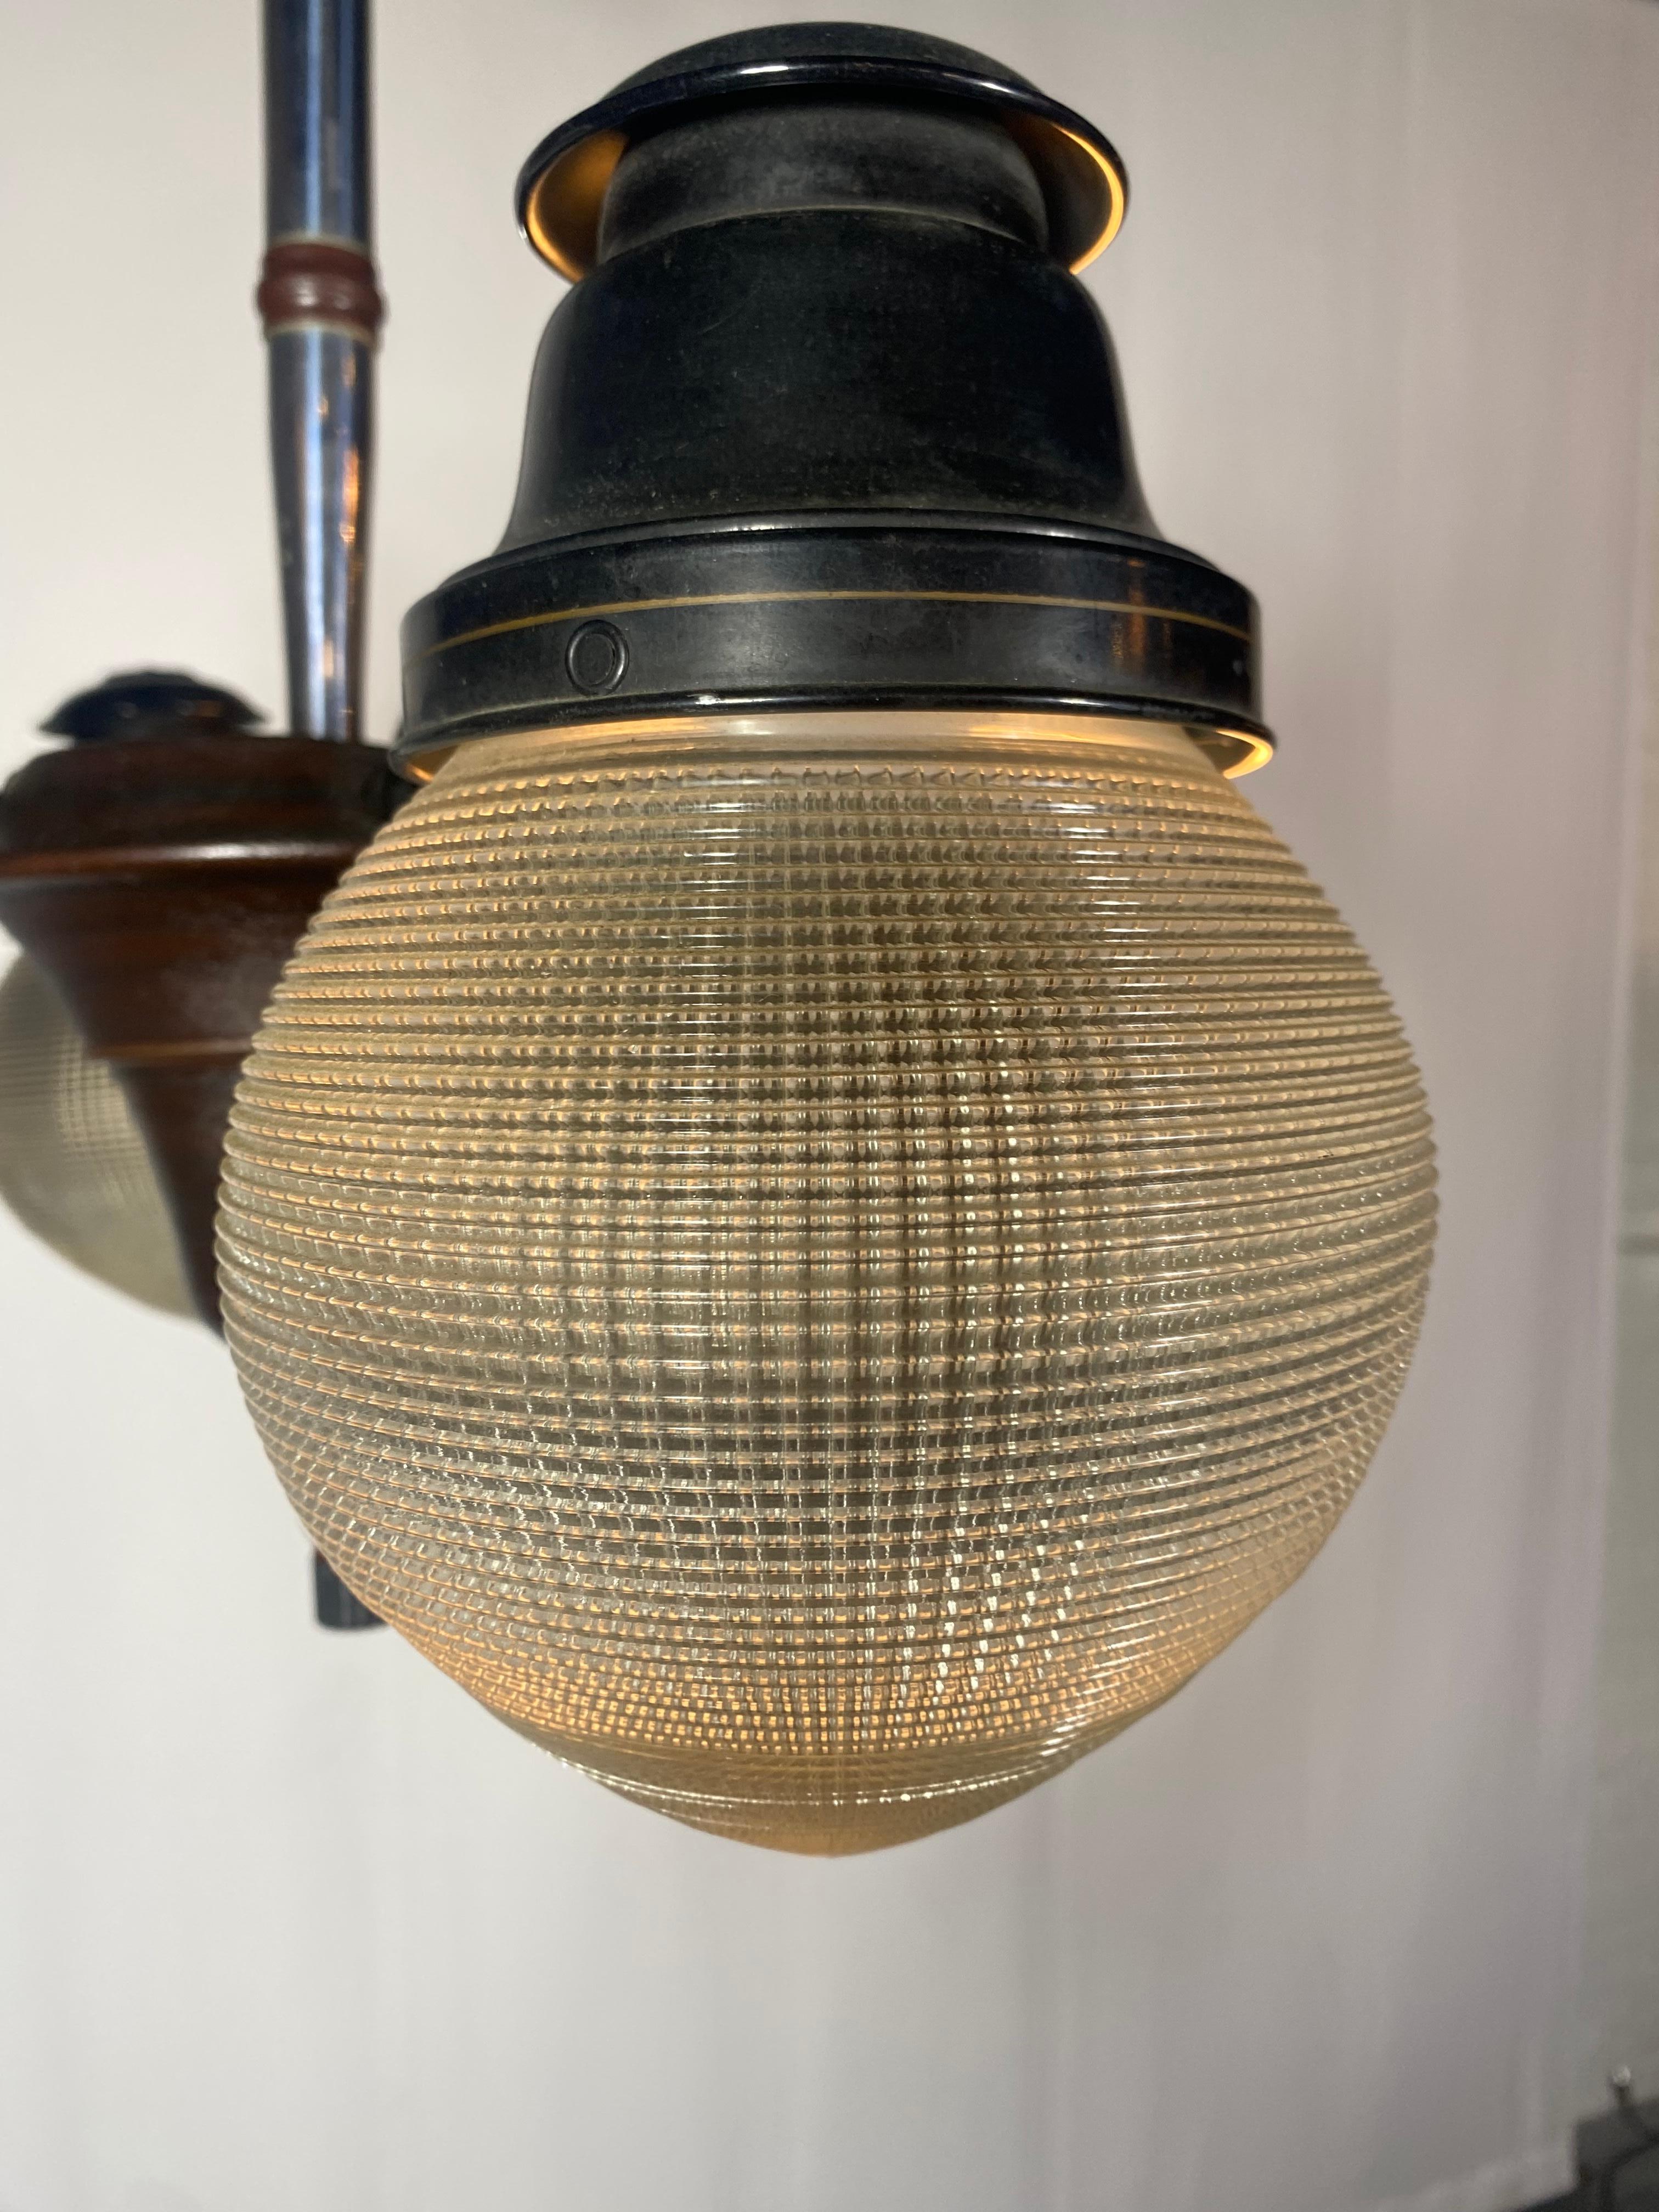 Nice example of a beautiful 1920 Ritter Dental lamp. This light has a unique 4-way switch that allows the bulbs to be turned on one at a time for just the right amount of light. Retains 4 Original Holophane shades.Amazing rich dark brown patina.